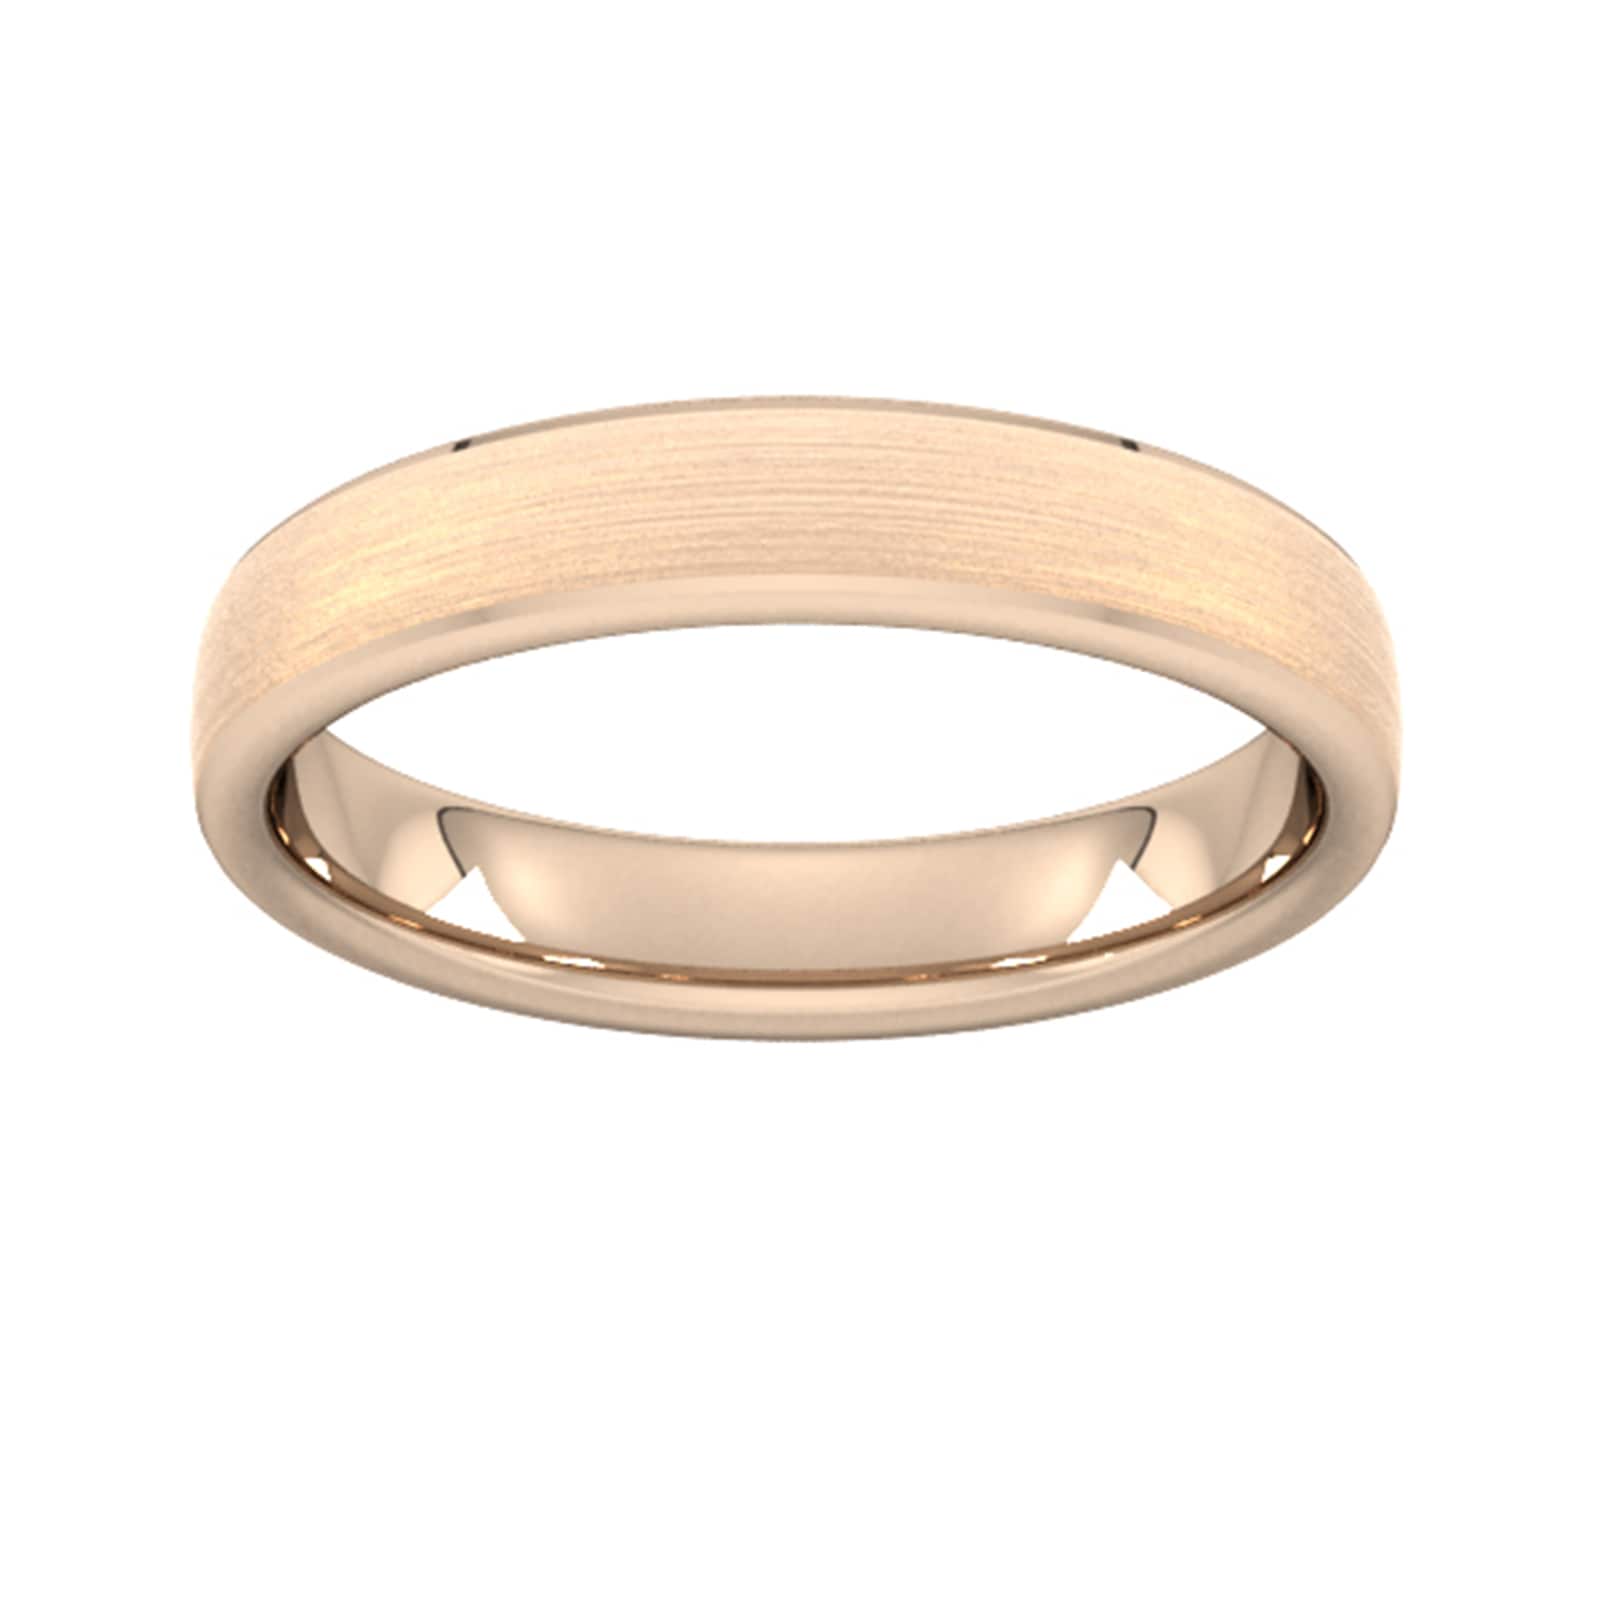 4mm D Shape Standard Polished Chamfered Edges With Matt Centre Wedding Ring In 9 Carat Rose Gold - Ring Size G